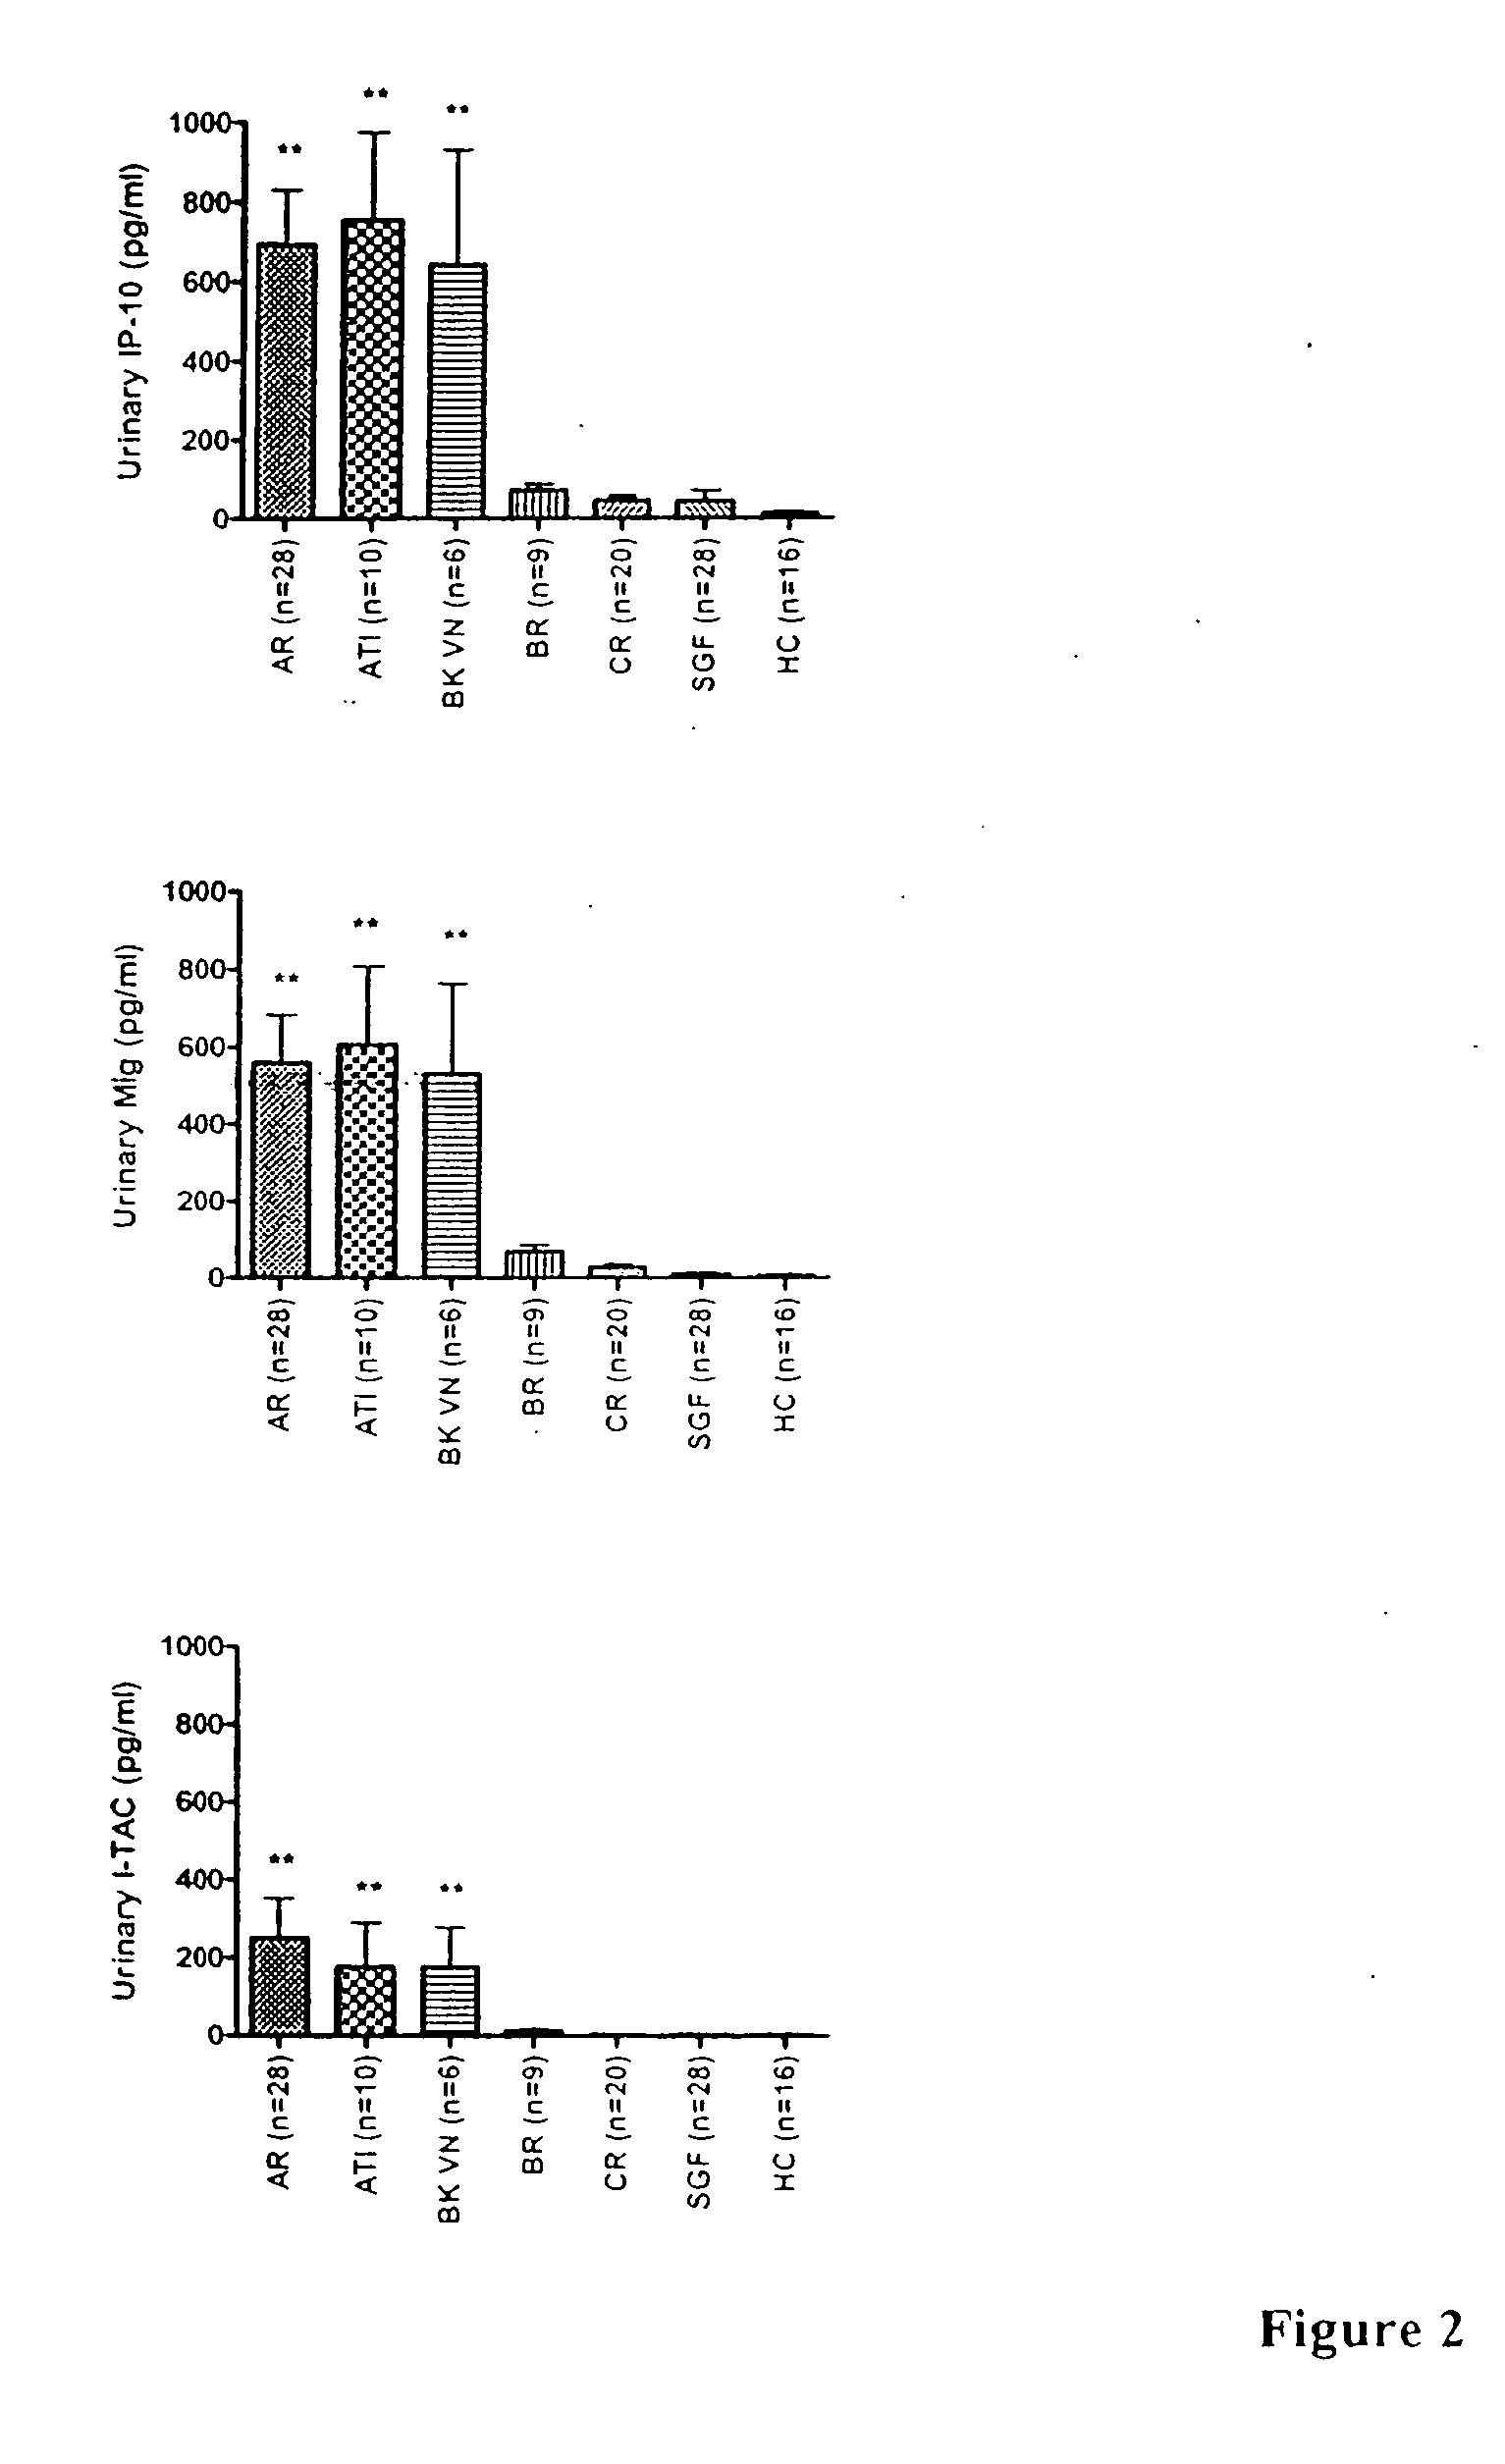 Systems and methods for characterizing conditions and diseases associated with organ transplantation and organ health